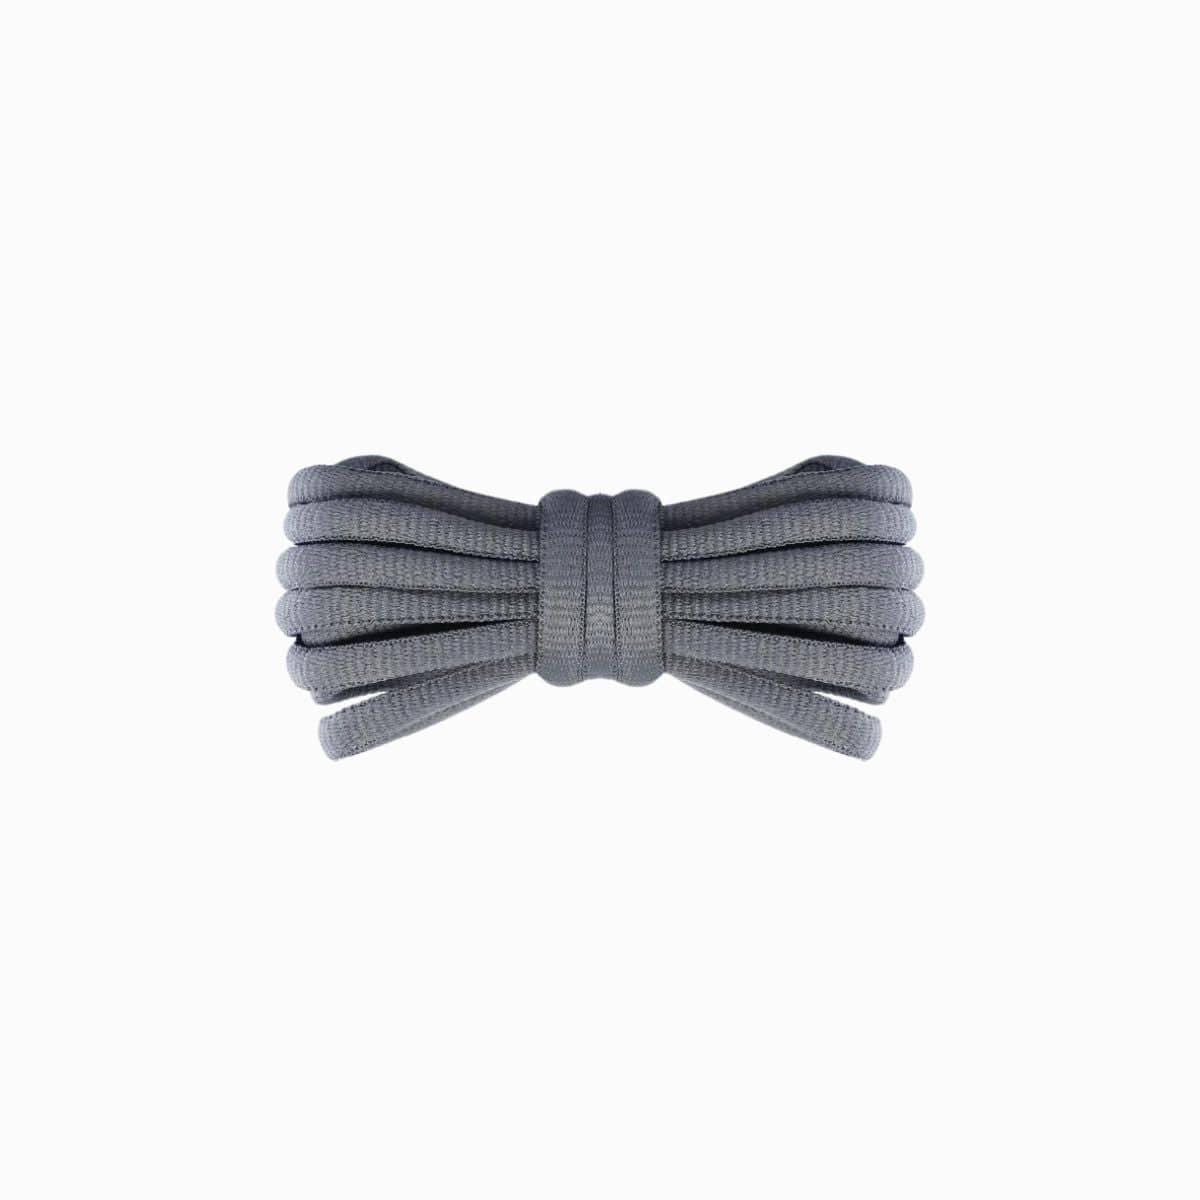 Dark Grey Replacement Adidas Shoe Laces for Adidas Spezial Sneakers by Kicks Shoelaces